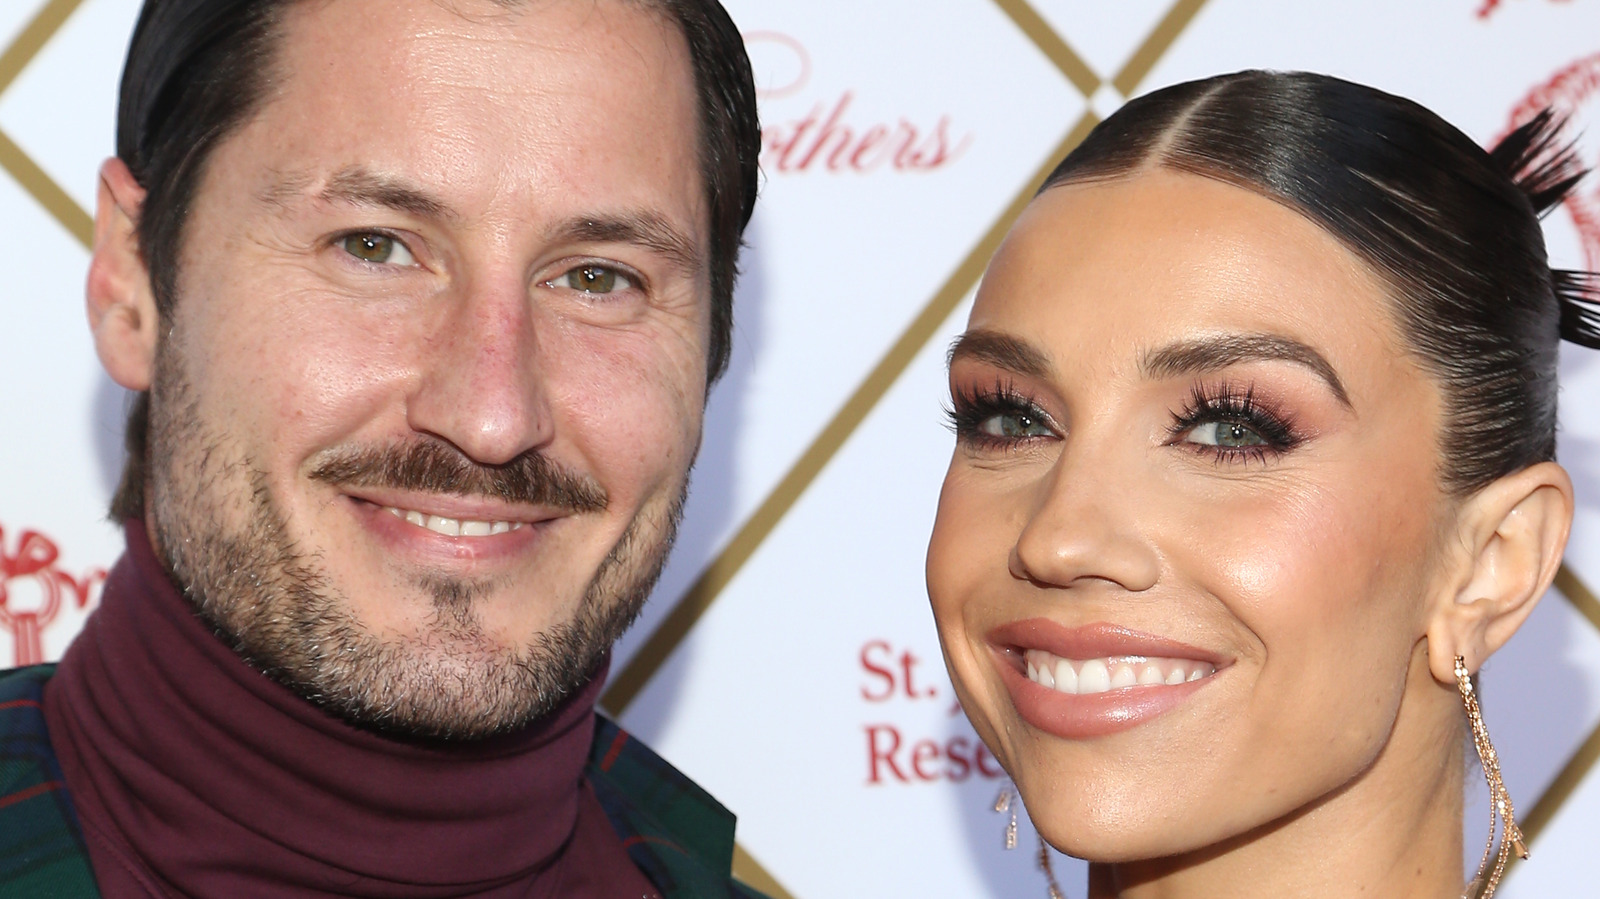 DWTS’ Jenna Johnson And Val Chmerkovskiy Have Exciting News To Share